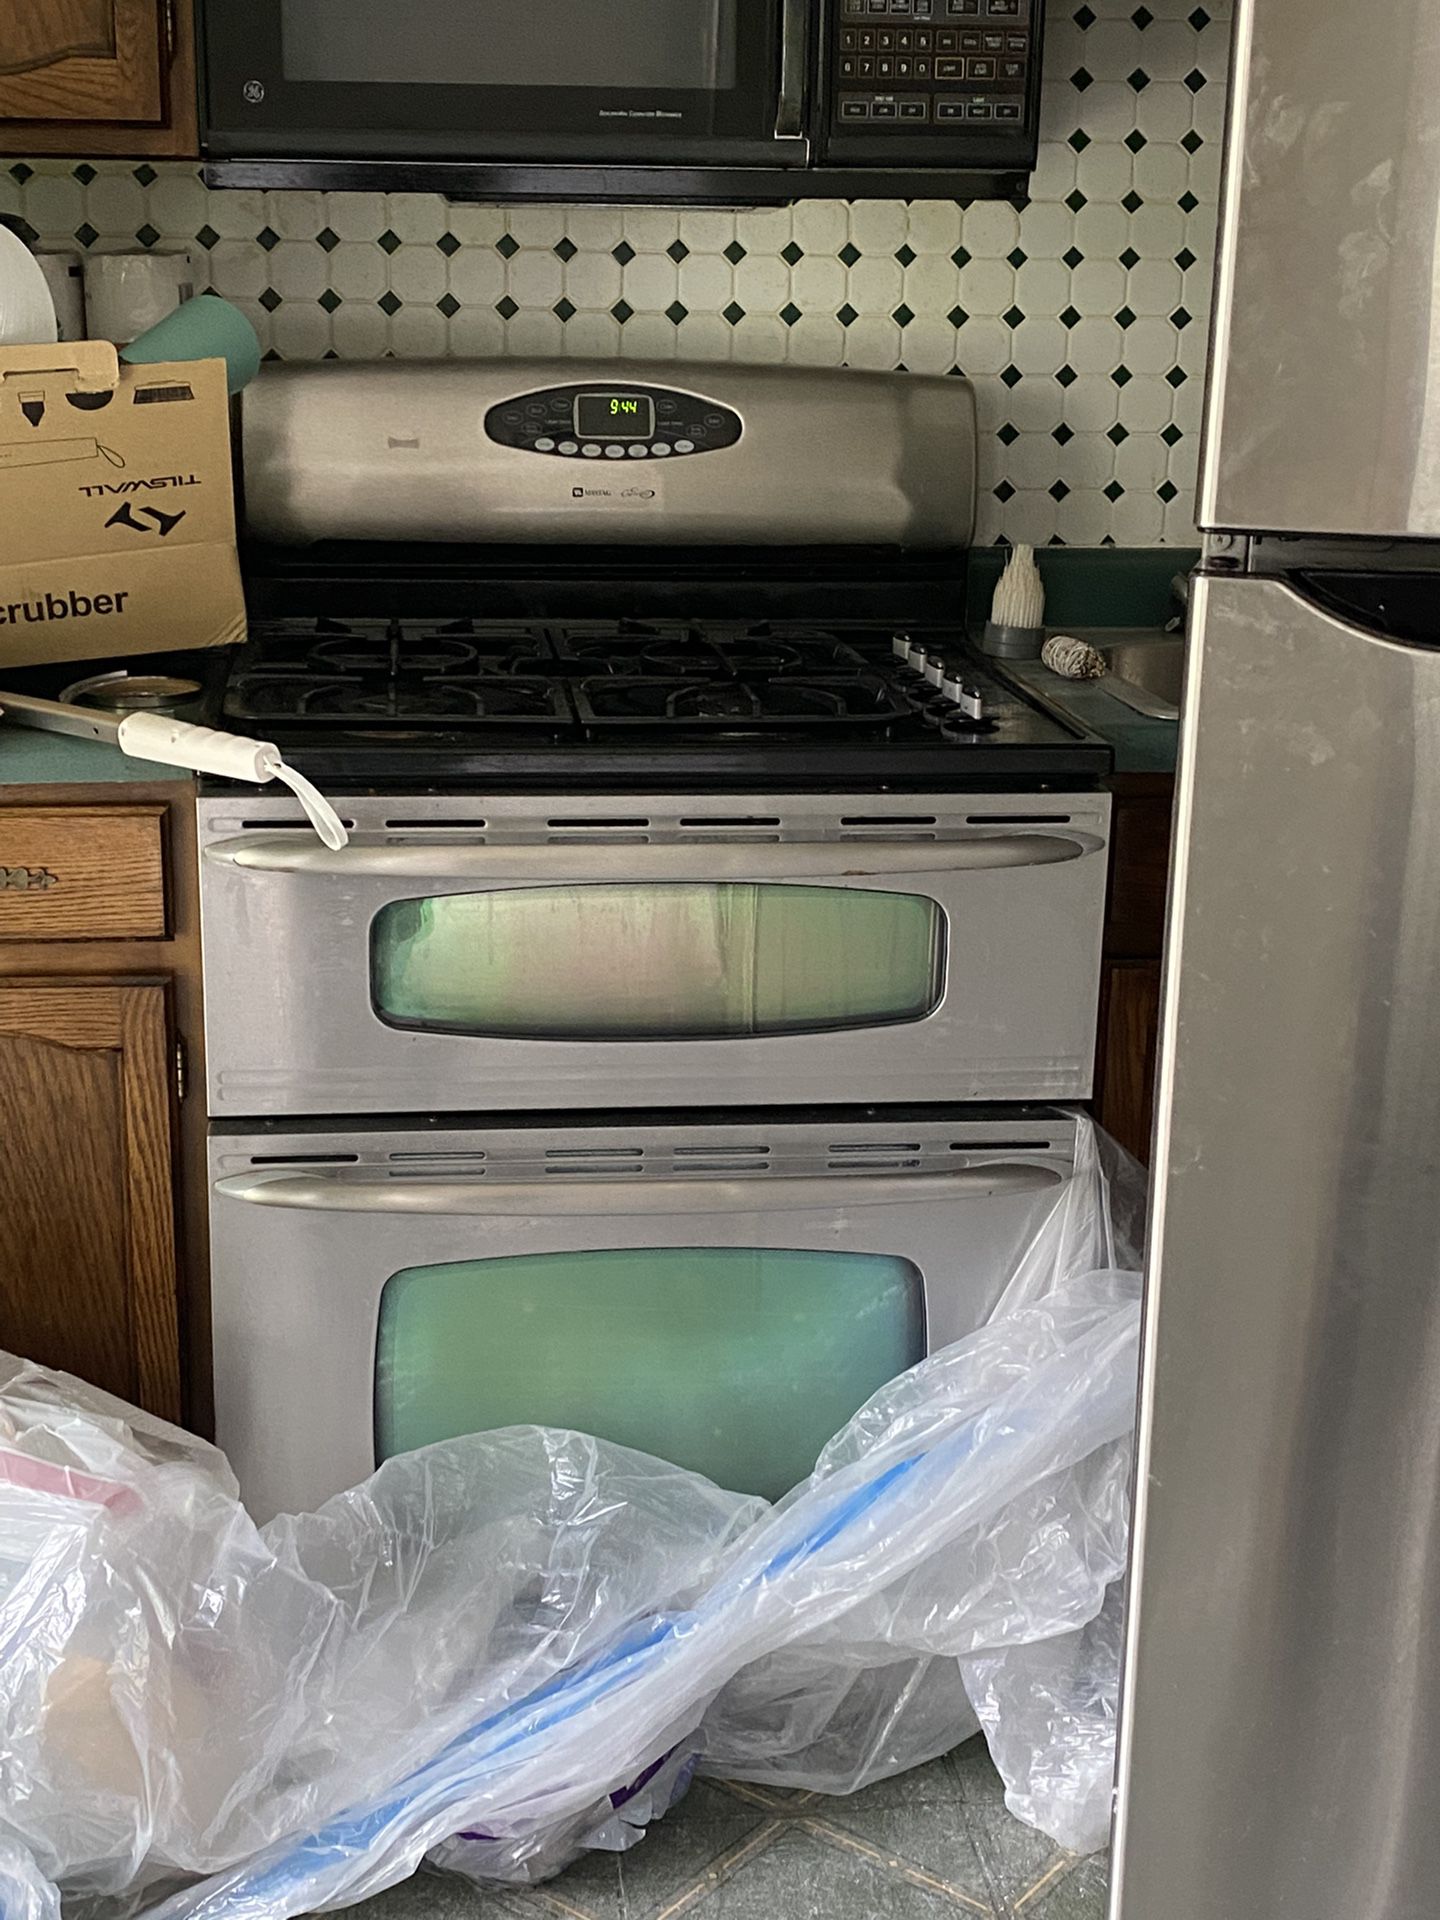 Maytag 5 Burner Double Oven Stove 